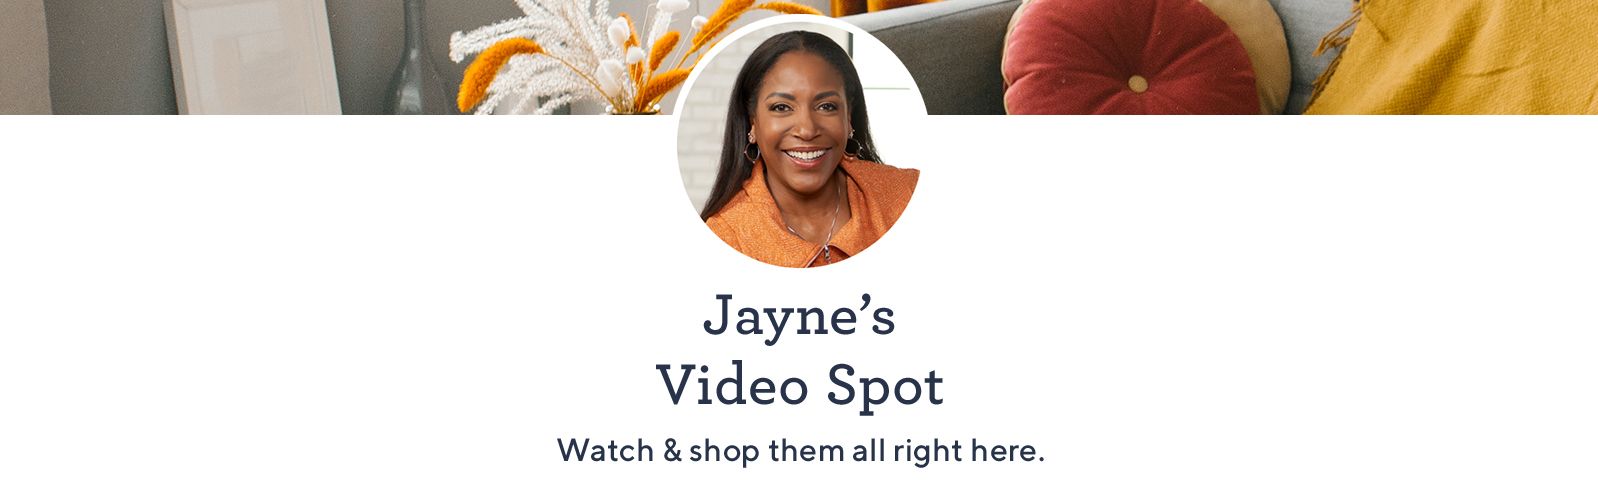 Jayne's Video Spot. Watch & shop them all right here.